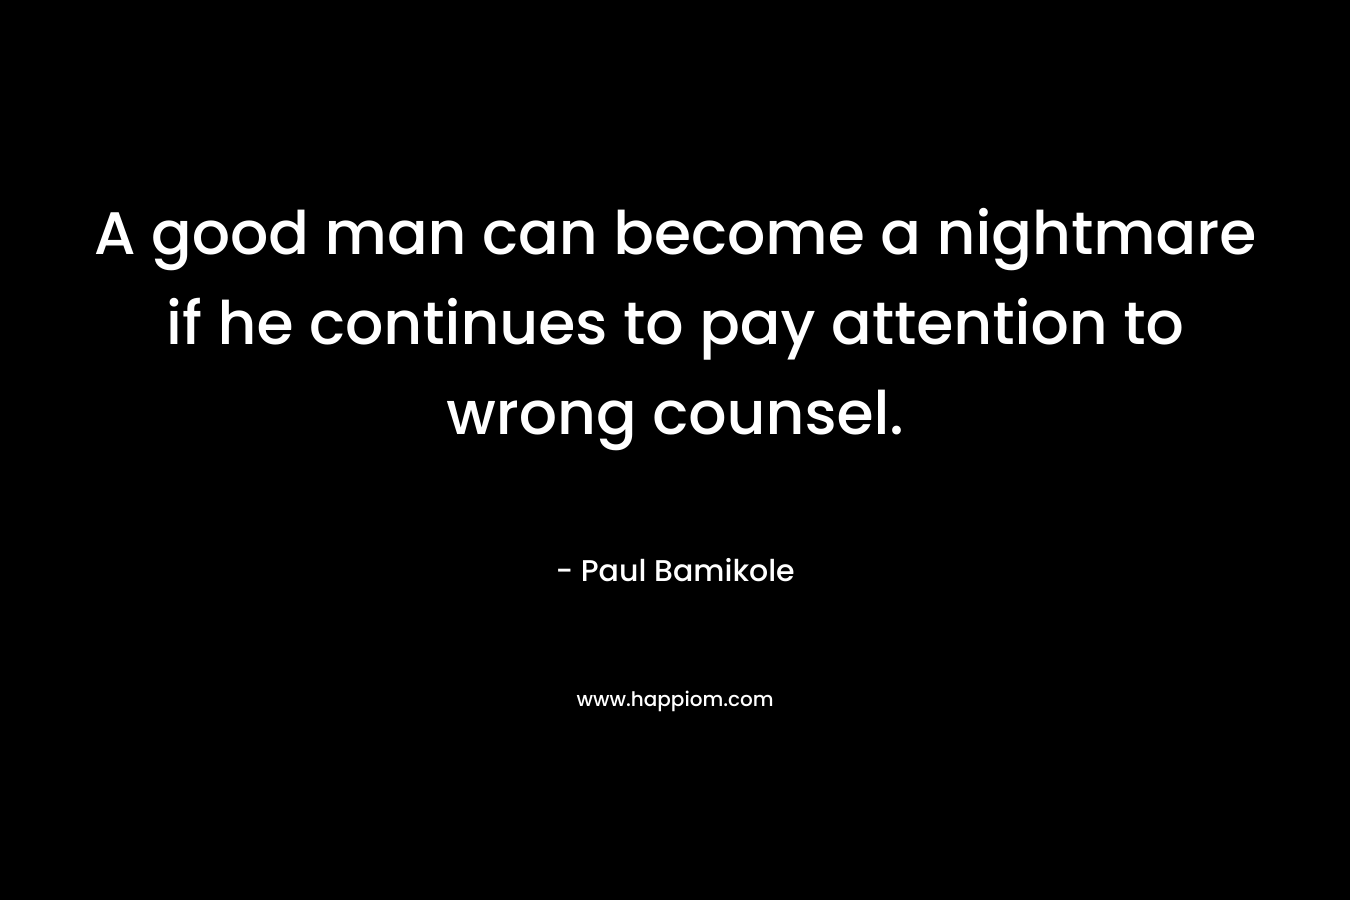 A good man can become a nightmare if he continues to pay attention to wrong counsel. – Paul Bamikole